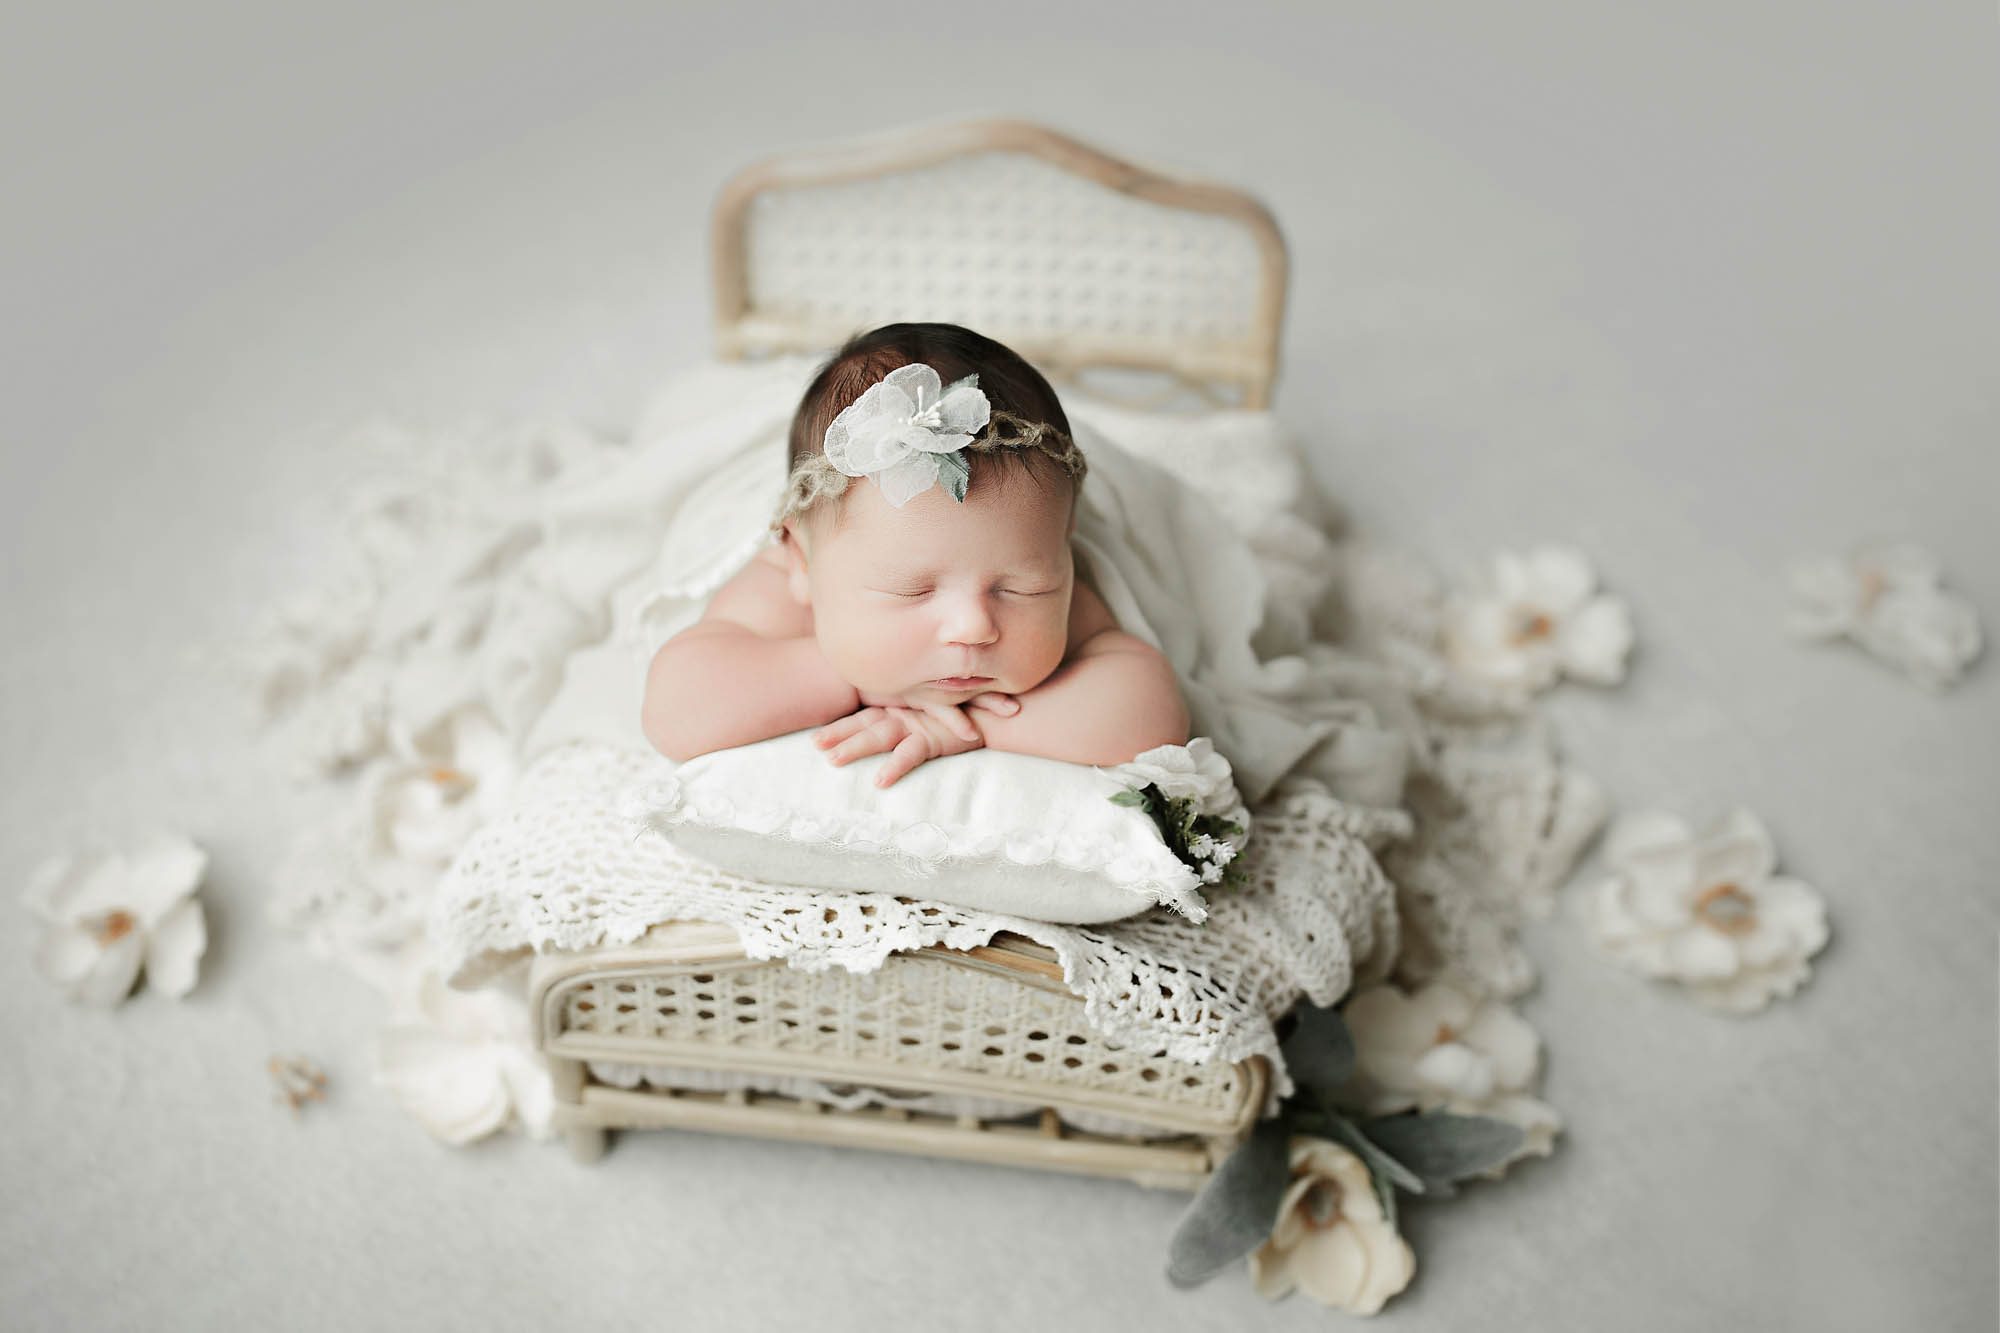 Canton Newborn Photographer newborn girl on miniature bed prop with head on hands and a white floral headband